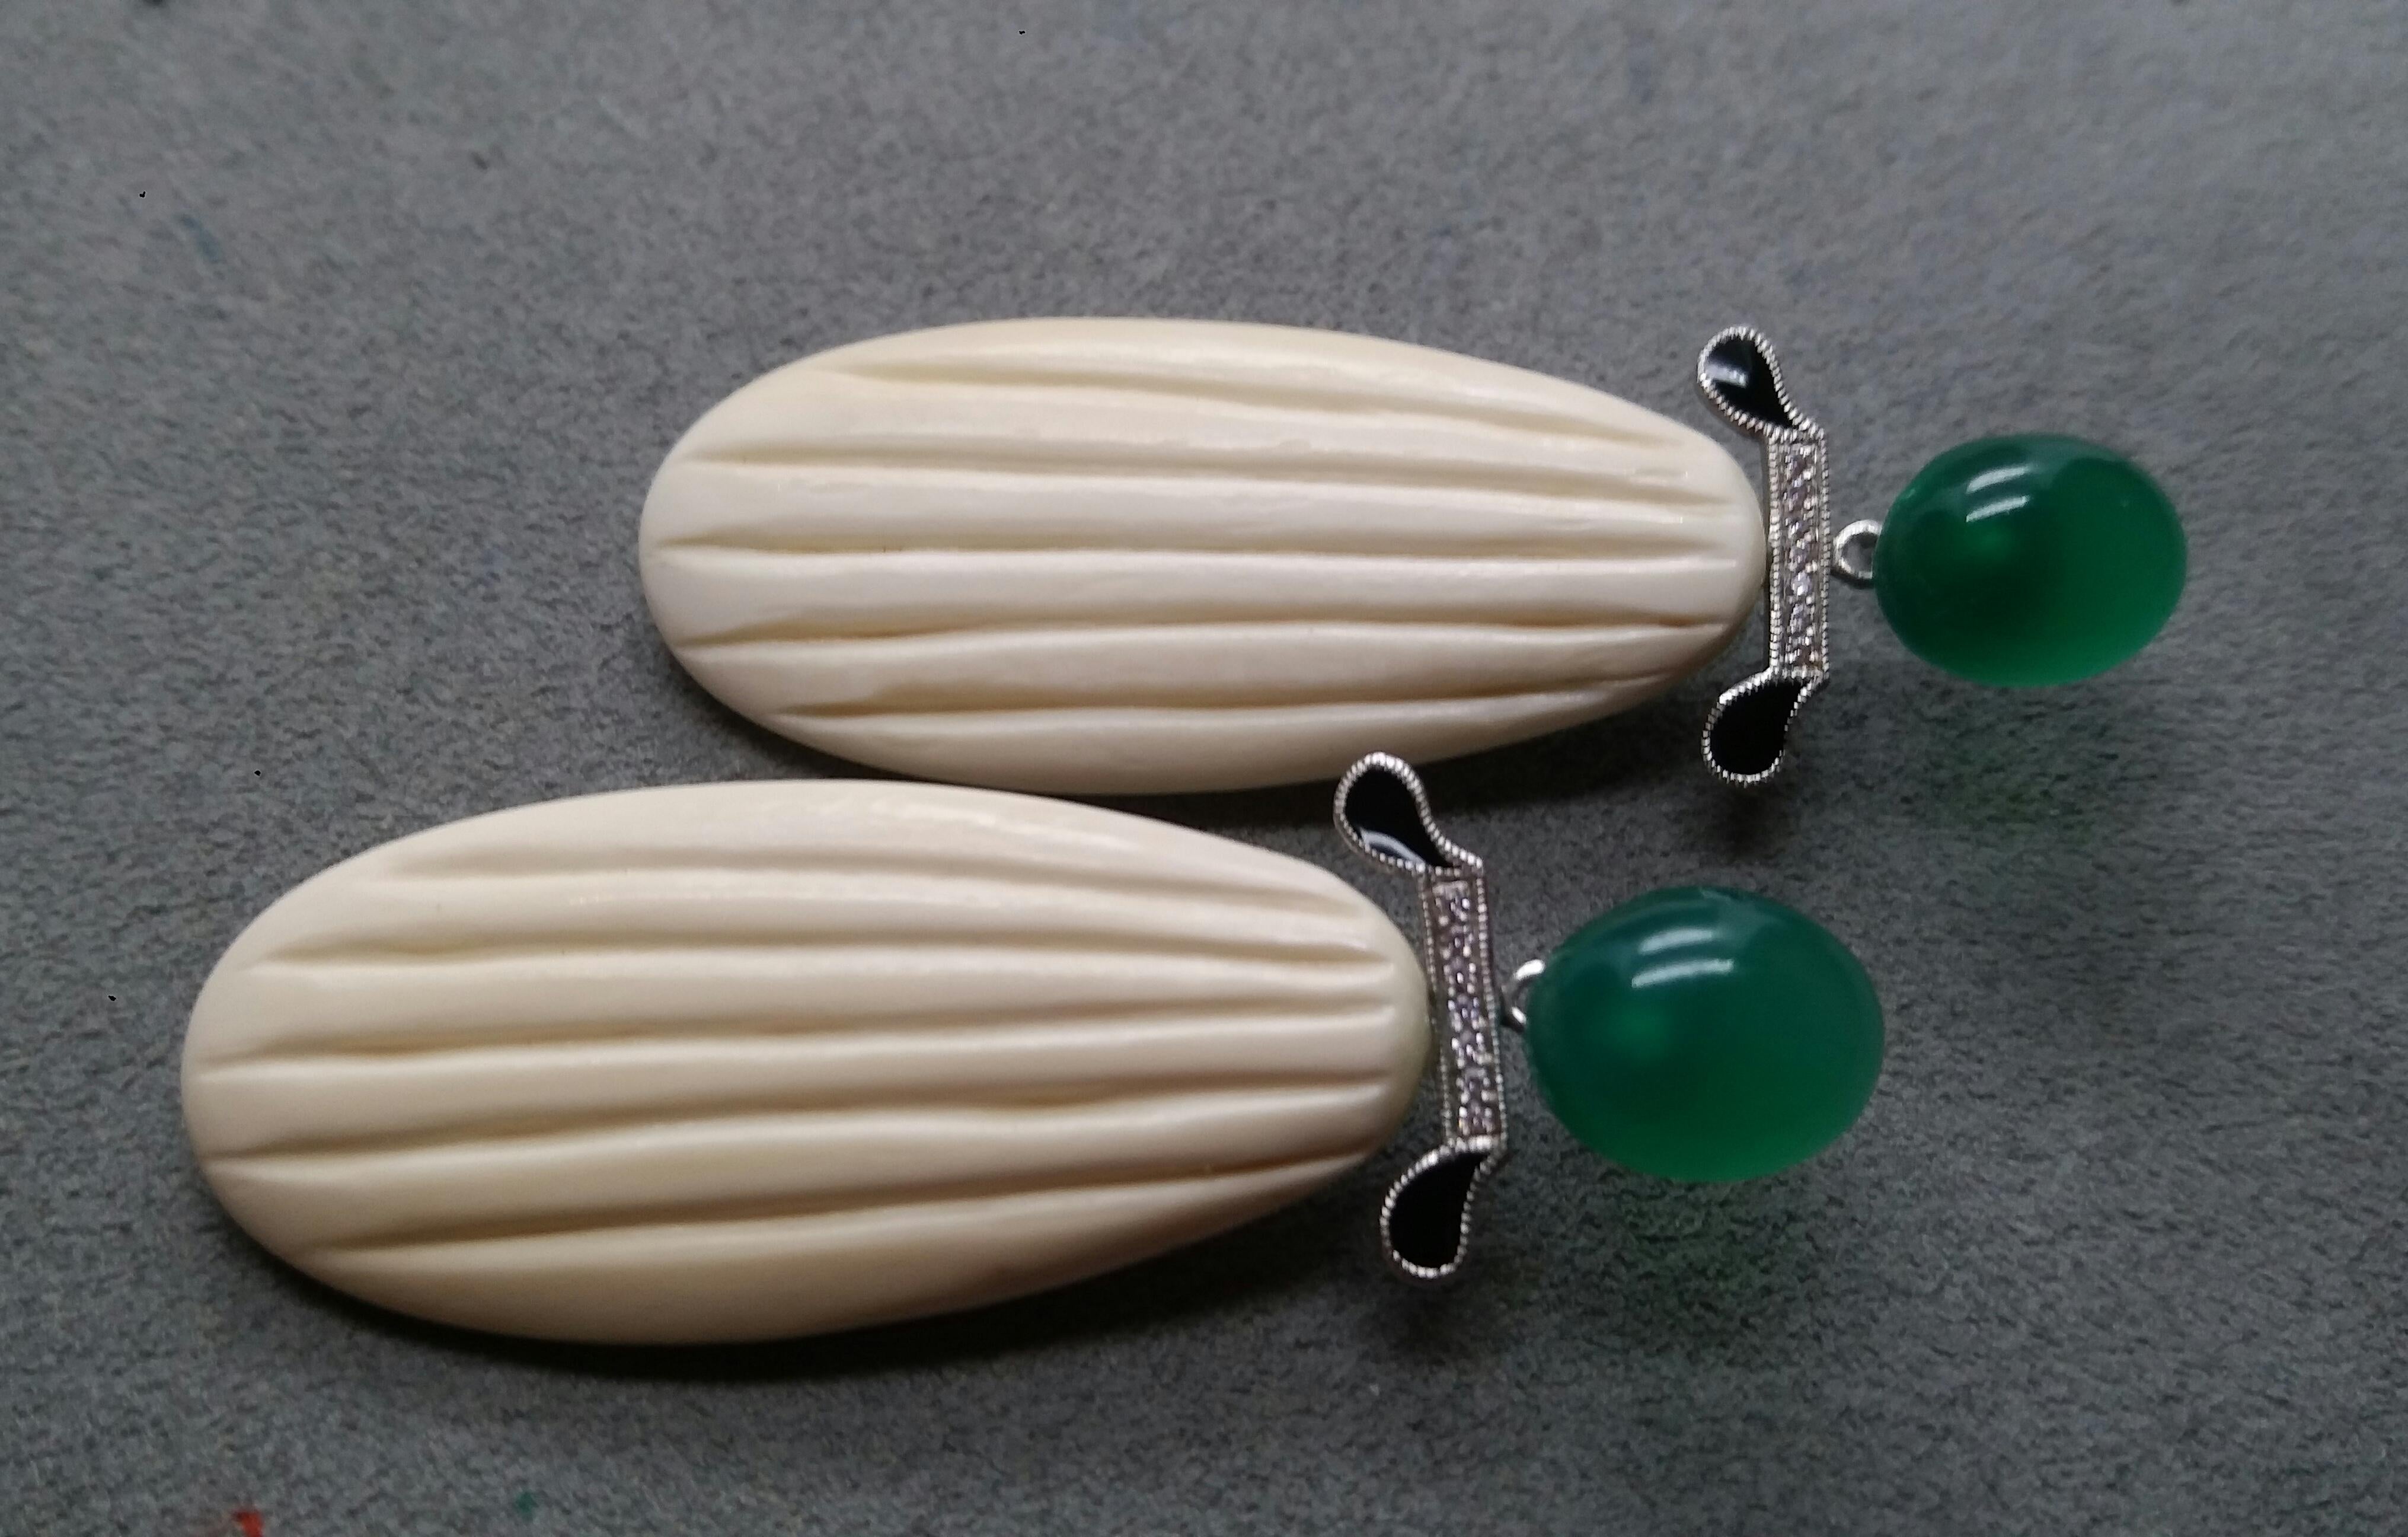 the top has 2 large oval Green Onyx cabochons, then we have a central part in white gold diamonds and black enamel, finally the bottom part is composed of 2 Mammoth bone engraved flat drops

In 1978 our workshop started in Italy to make simple-chic